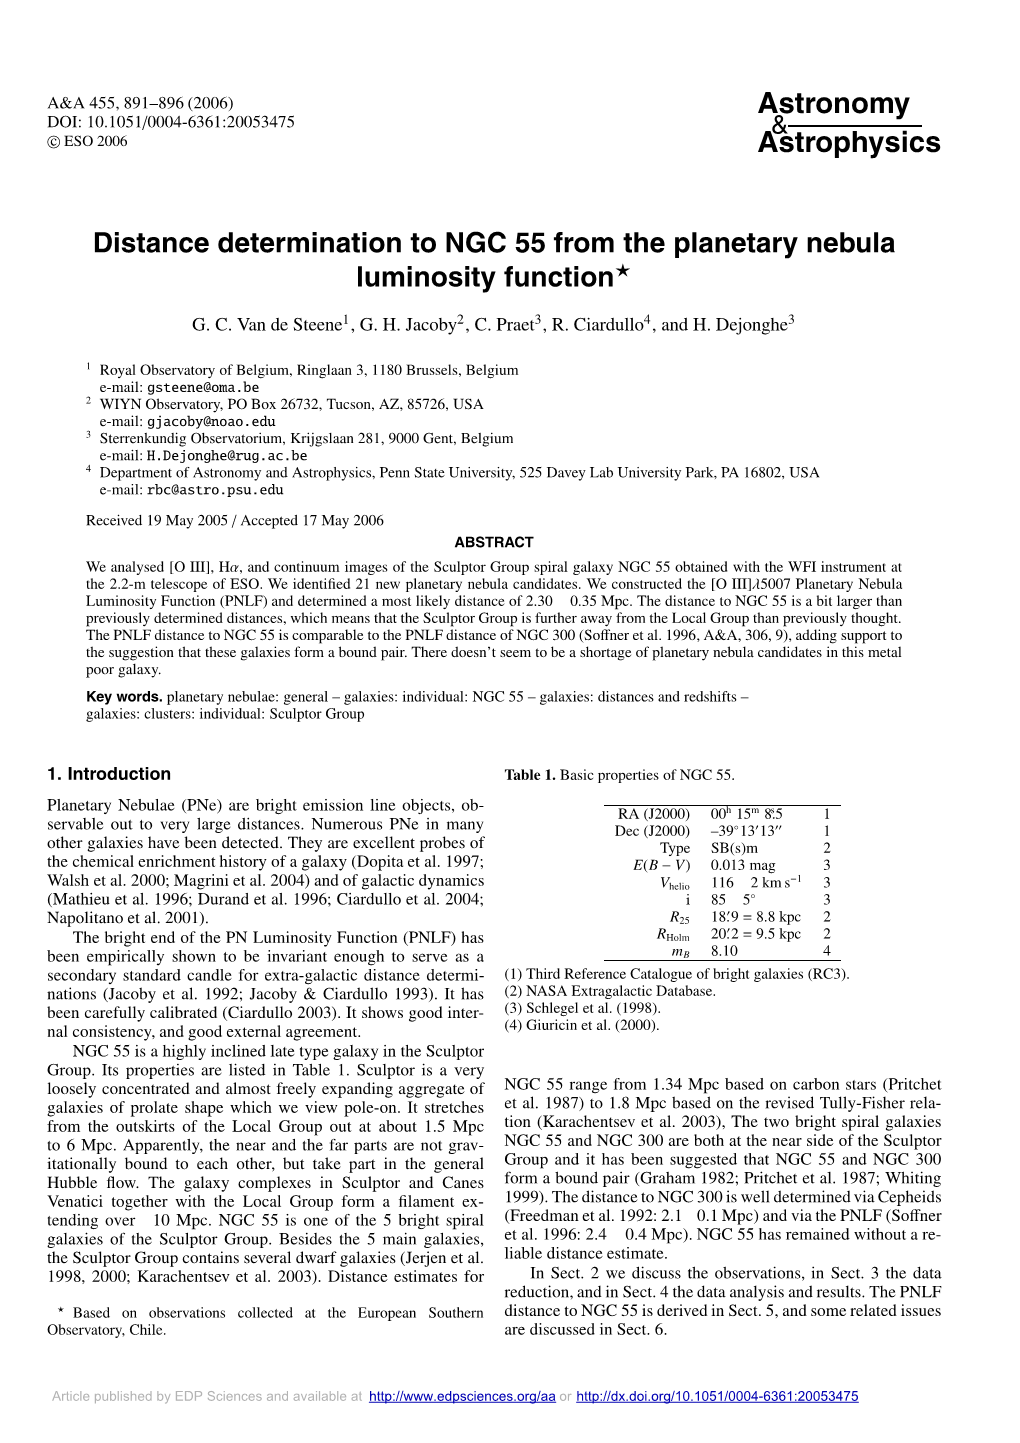 Distance Determination to NGC 55 from the Planetary Nebula Luminosity Function